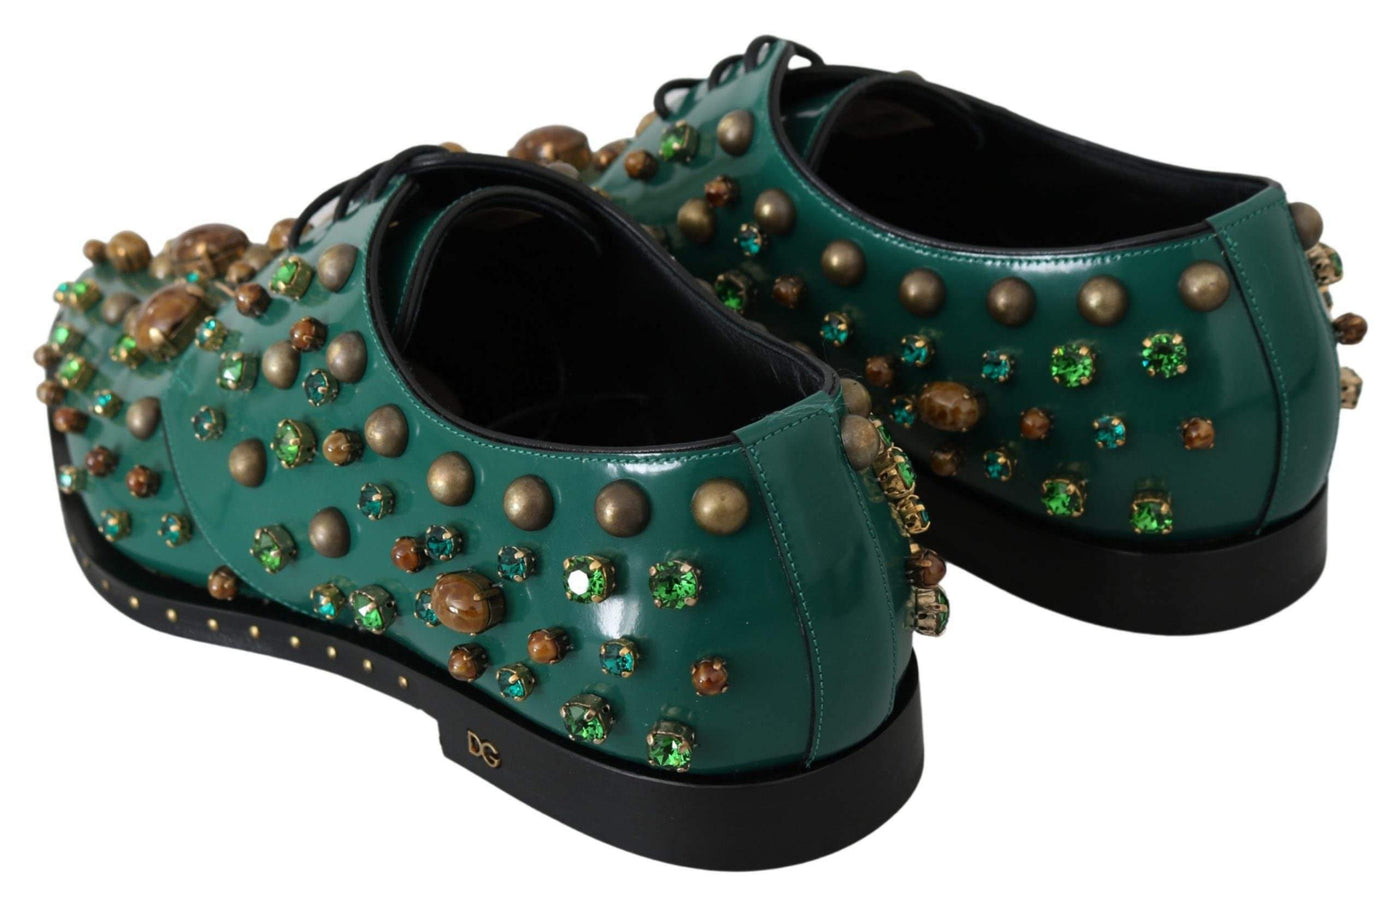 Dolce & Gabbana Green Leather Crystal Dress Broque Shoes #women, Brand_Dolce & Gabbana, Dolce & Gabbana, EU41/US10.5, feed-agegroup-adult, feed-color-green, feed-gender-female, feed-size-US10.5, Flat Shoes - Women - Shoes, Gender_Women, Green, Shoes - New Arrivals at SEYMAYKA